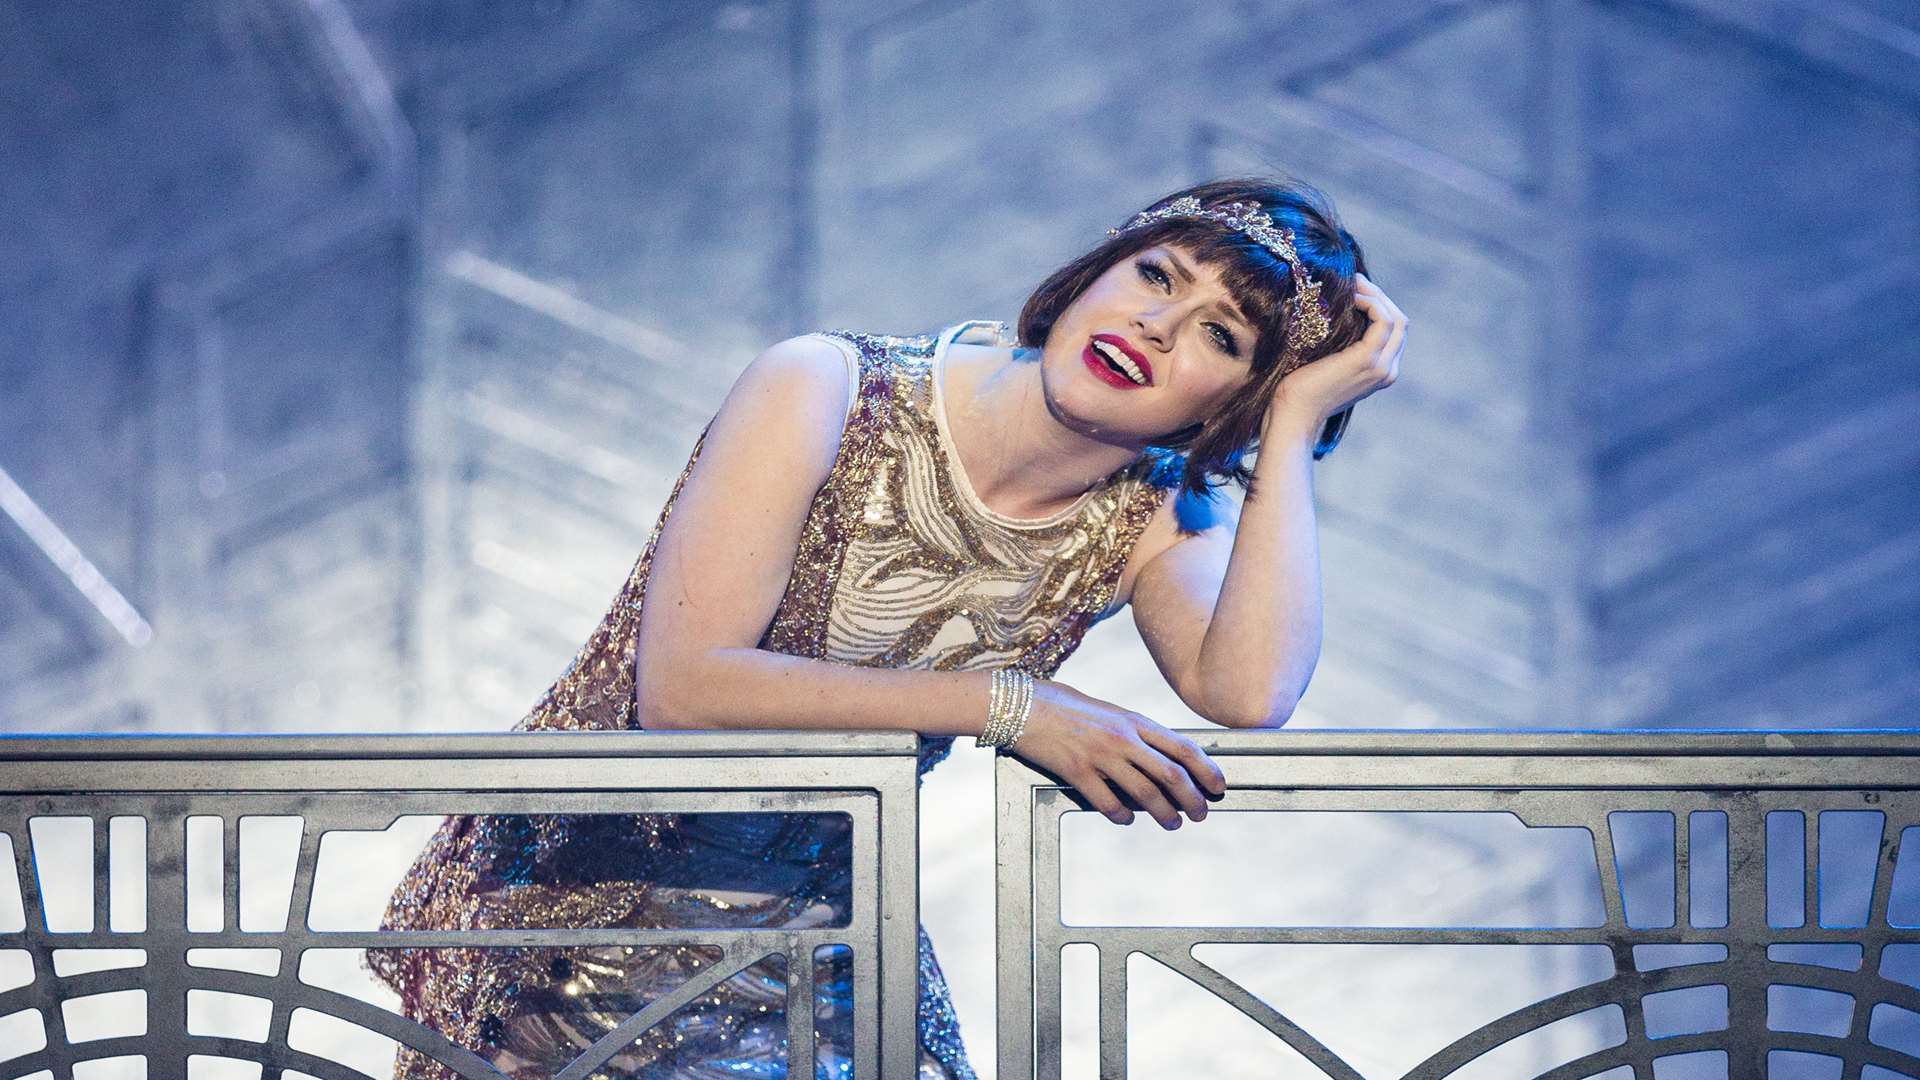 Last year's Strictly winner Joanne Clifton will star in Thoroughly Modern Millie